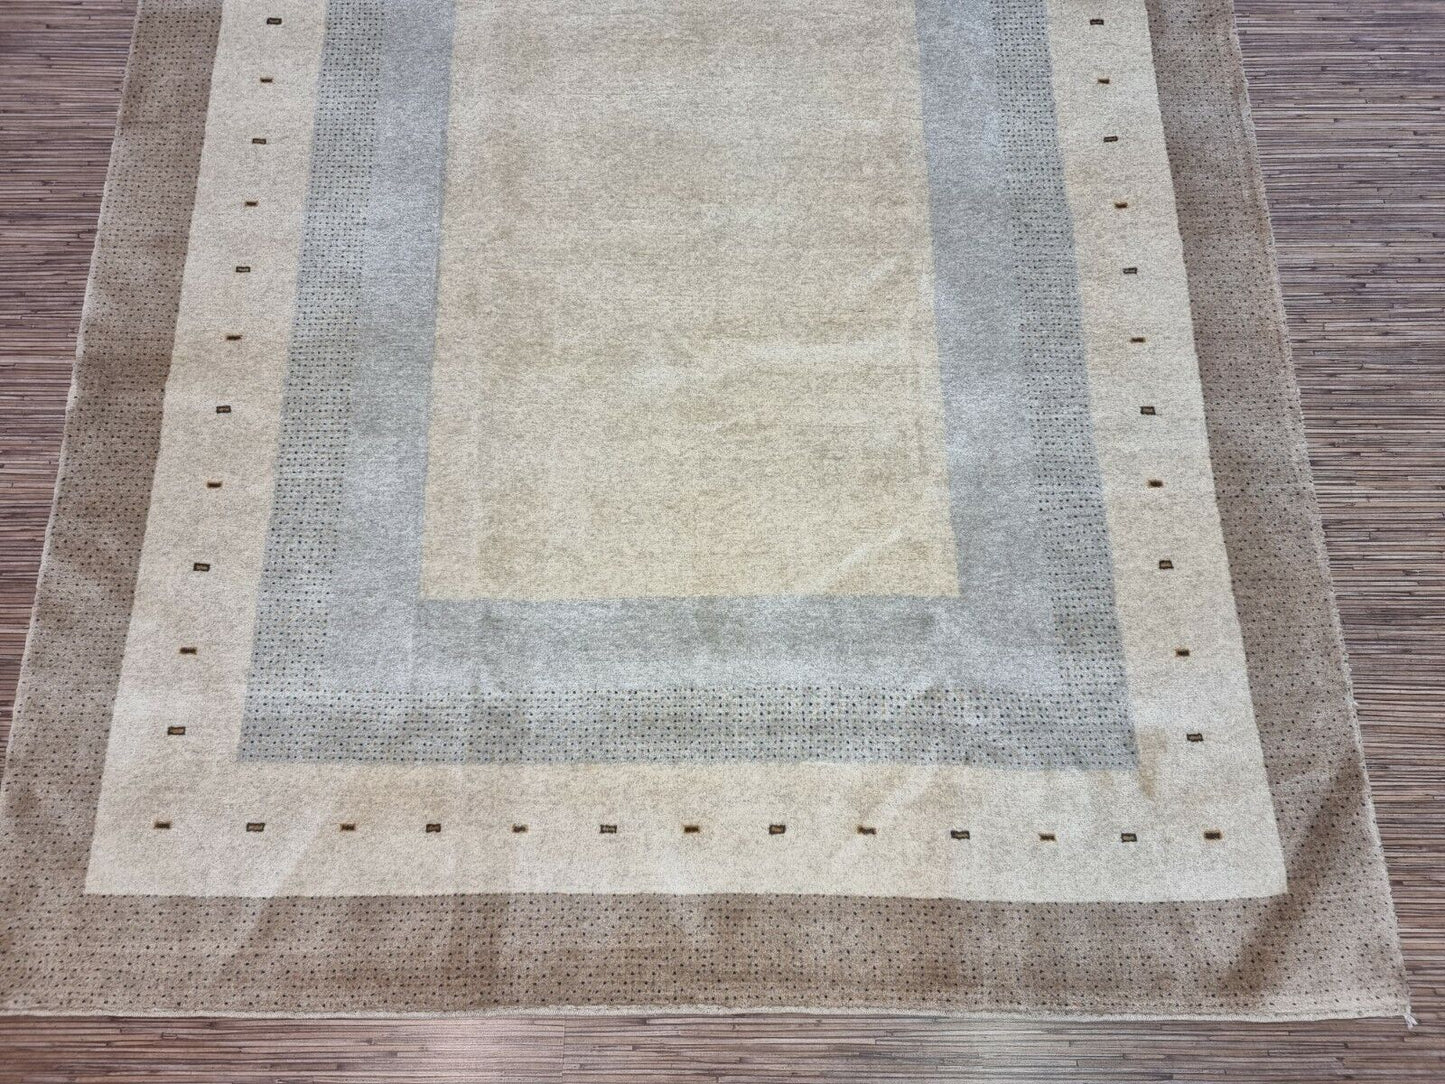 Detailed shot of the cream-colored elegance on the Handmade Vintage Persian Style Gabbeh Rug